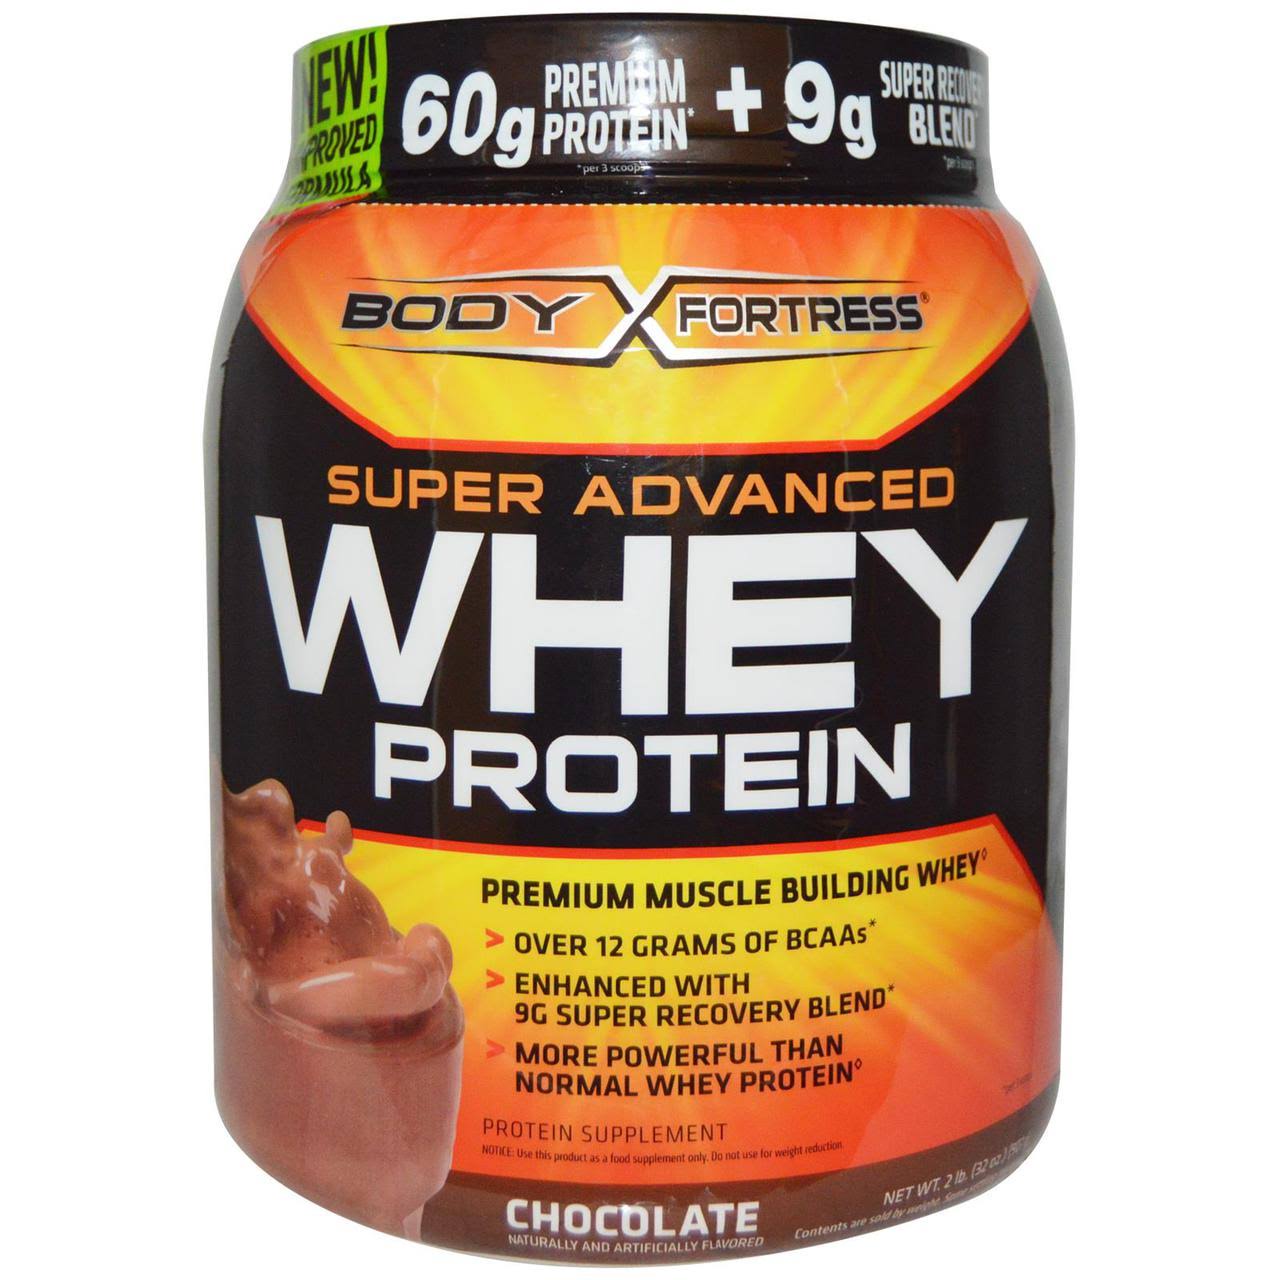 Body Fortress Super Advanced Whey Protein Chocolate Protein Supplement